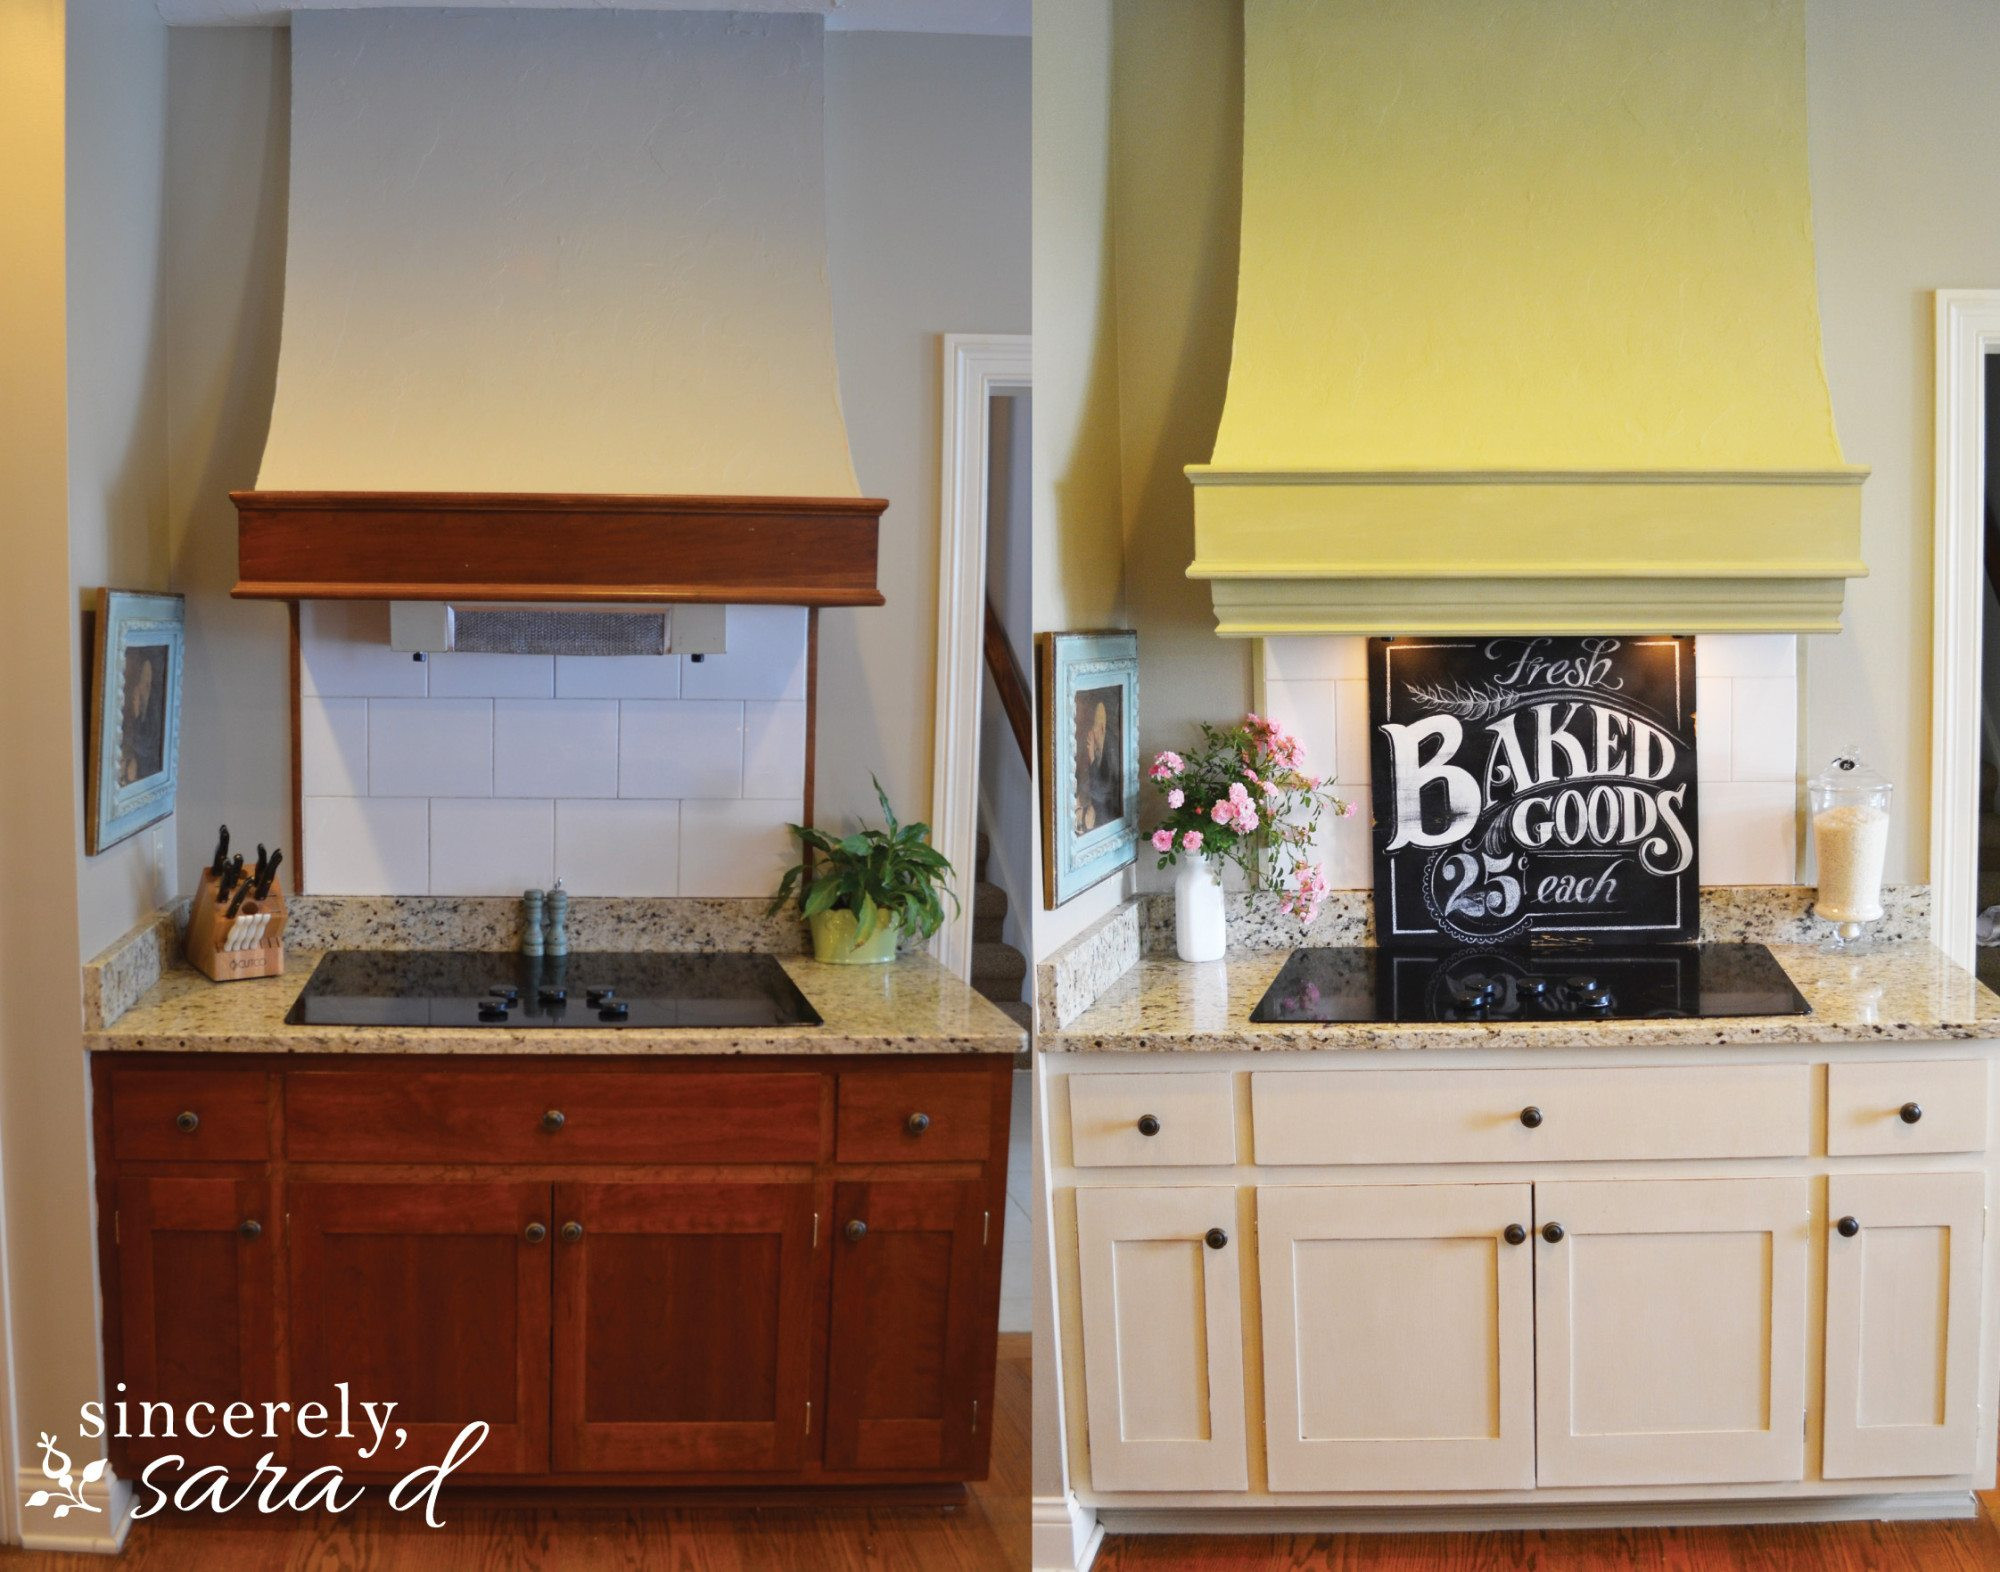 Chalk Paint Kitchen Cabinets Before And After
 Painting Kitchen Cabinets with Chalk Paint Update